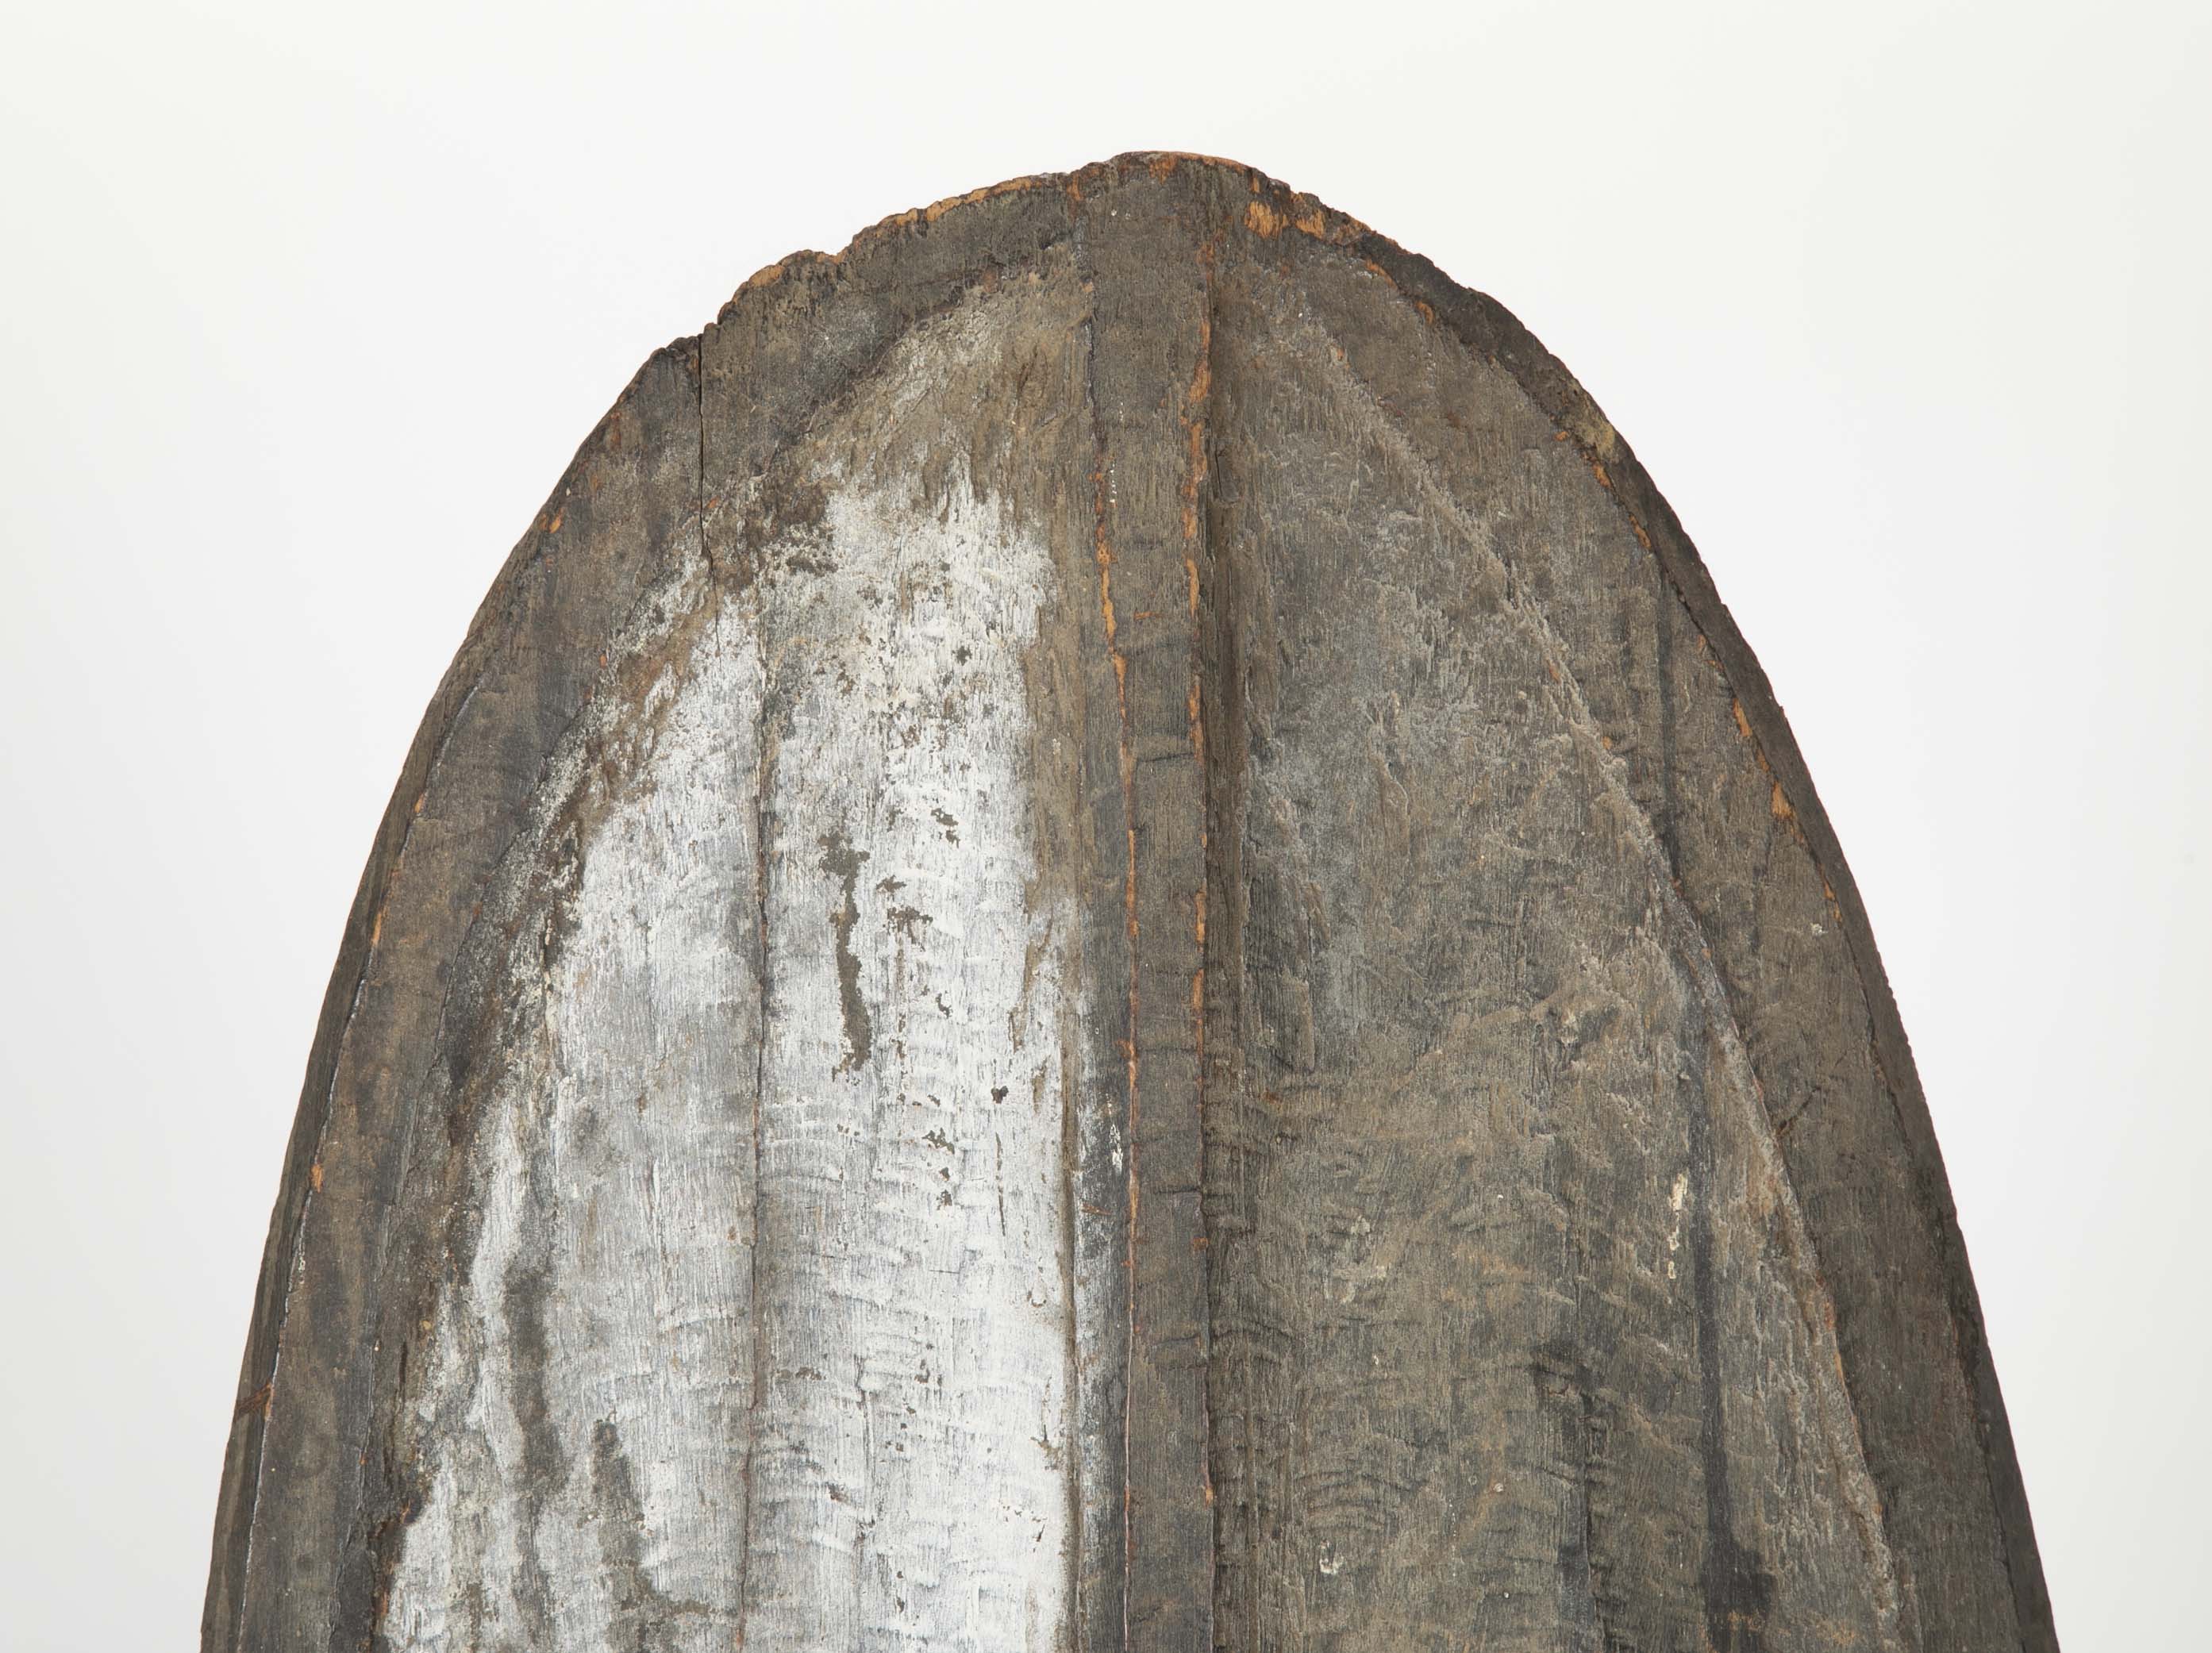 Western Mongo Shield from The Democratic Republic of Congo on Bronze Stand